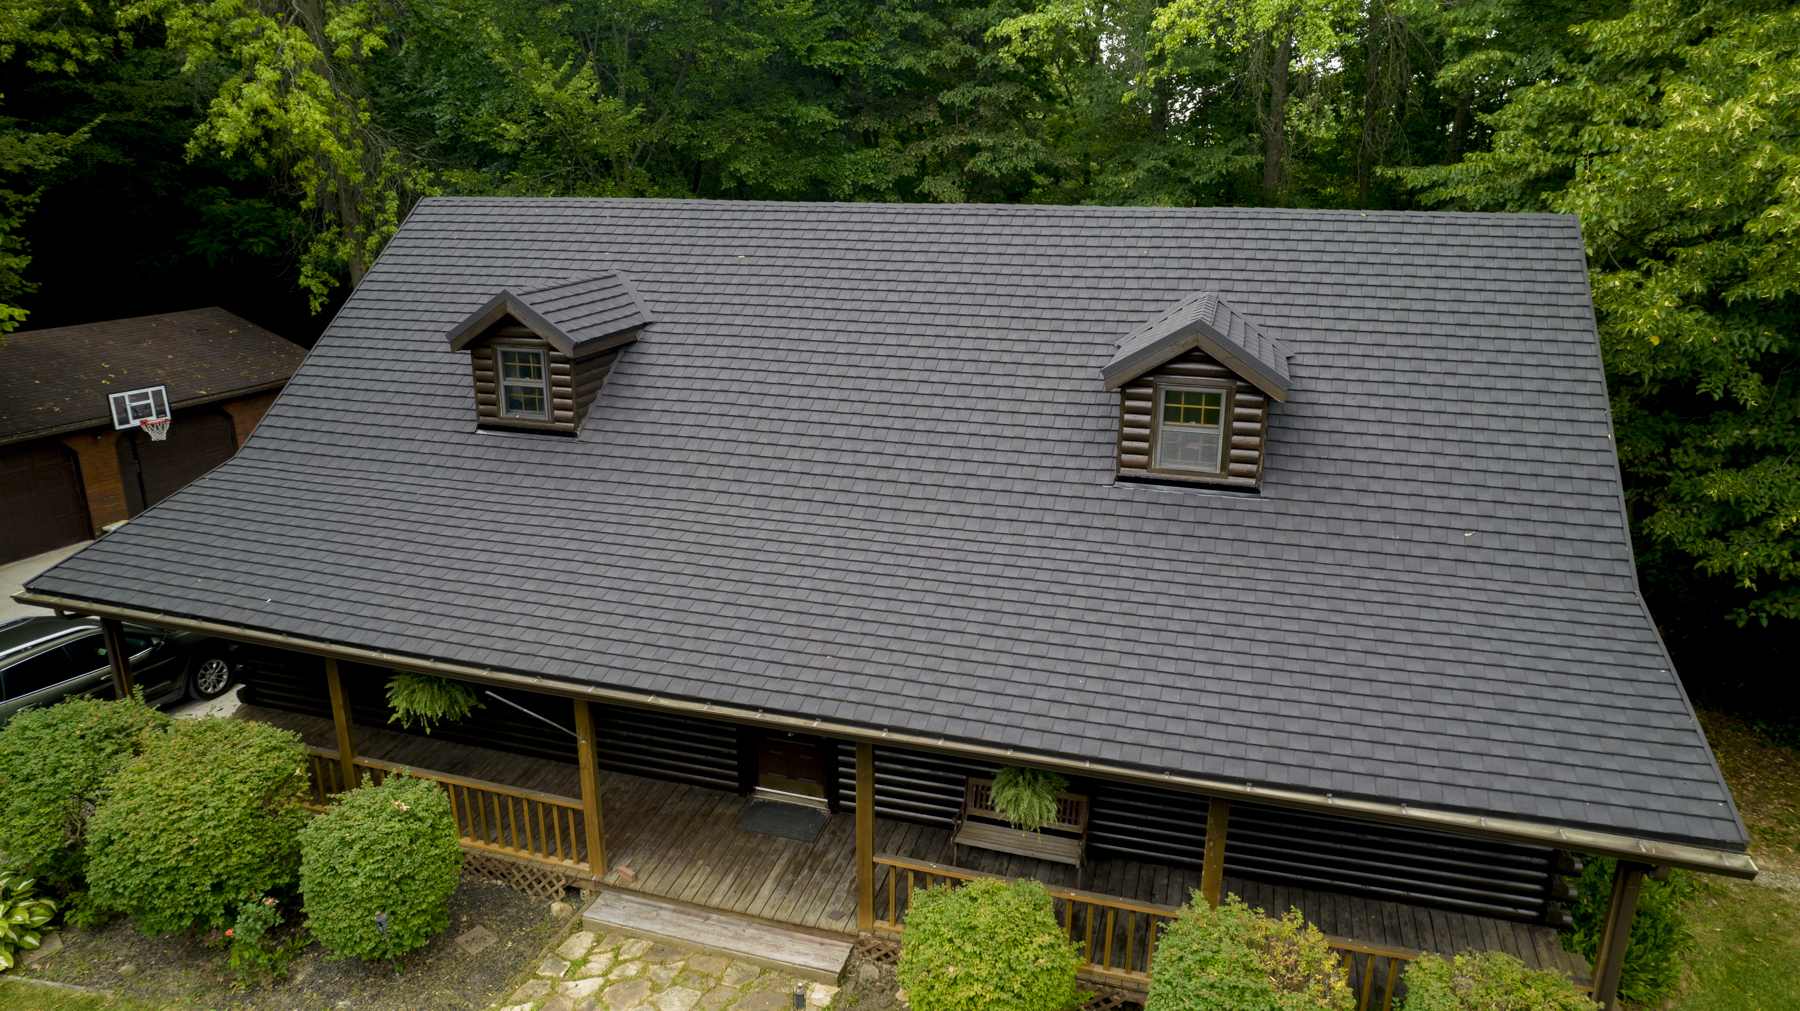 Stone Coated Metal Roofing is the ONLY Permanent Roof Solution!